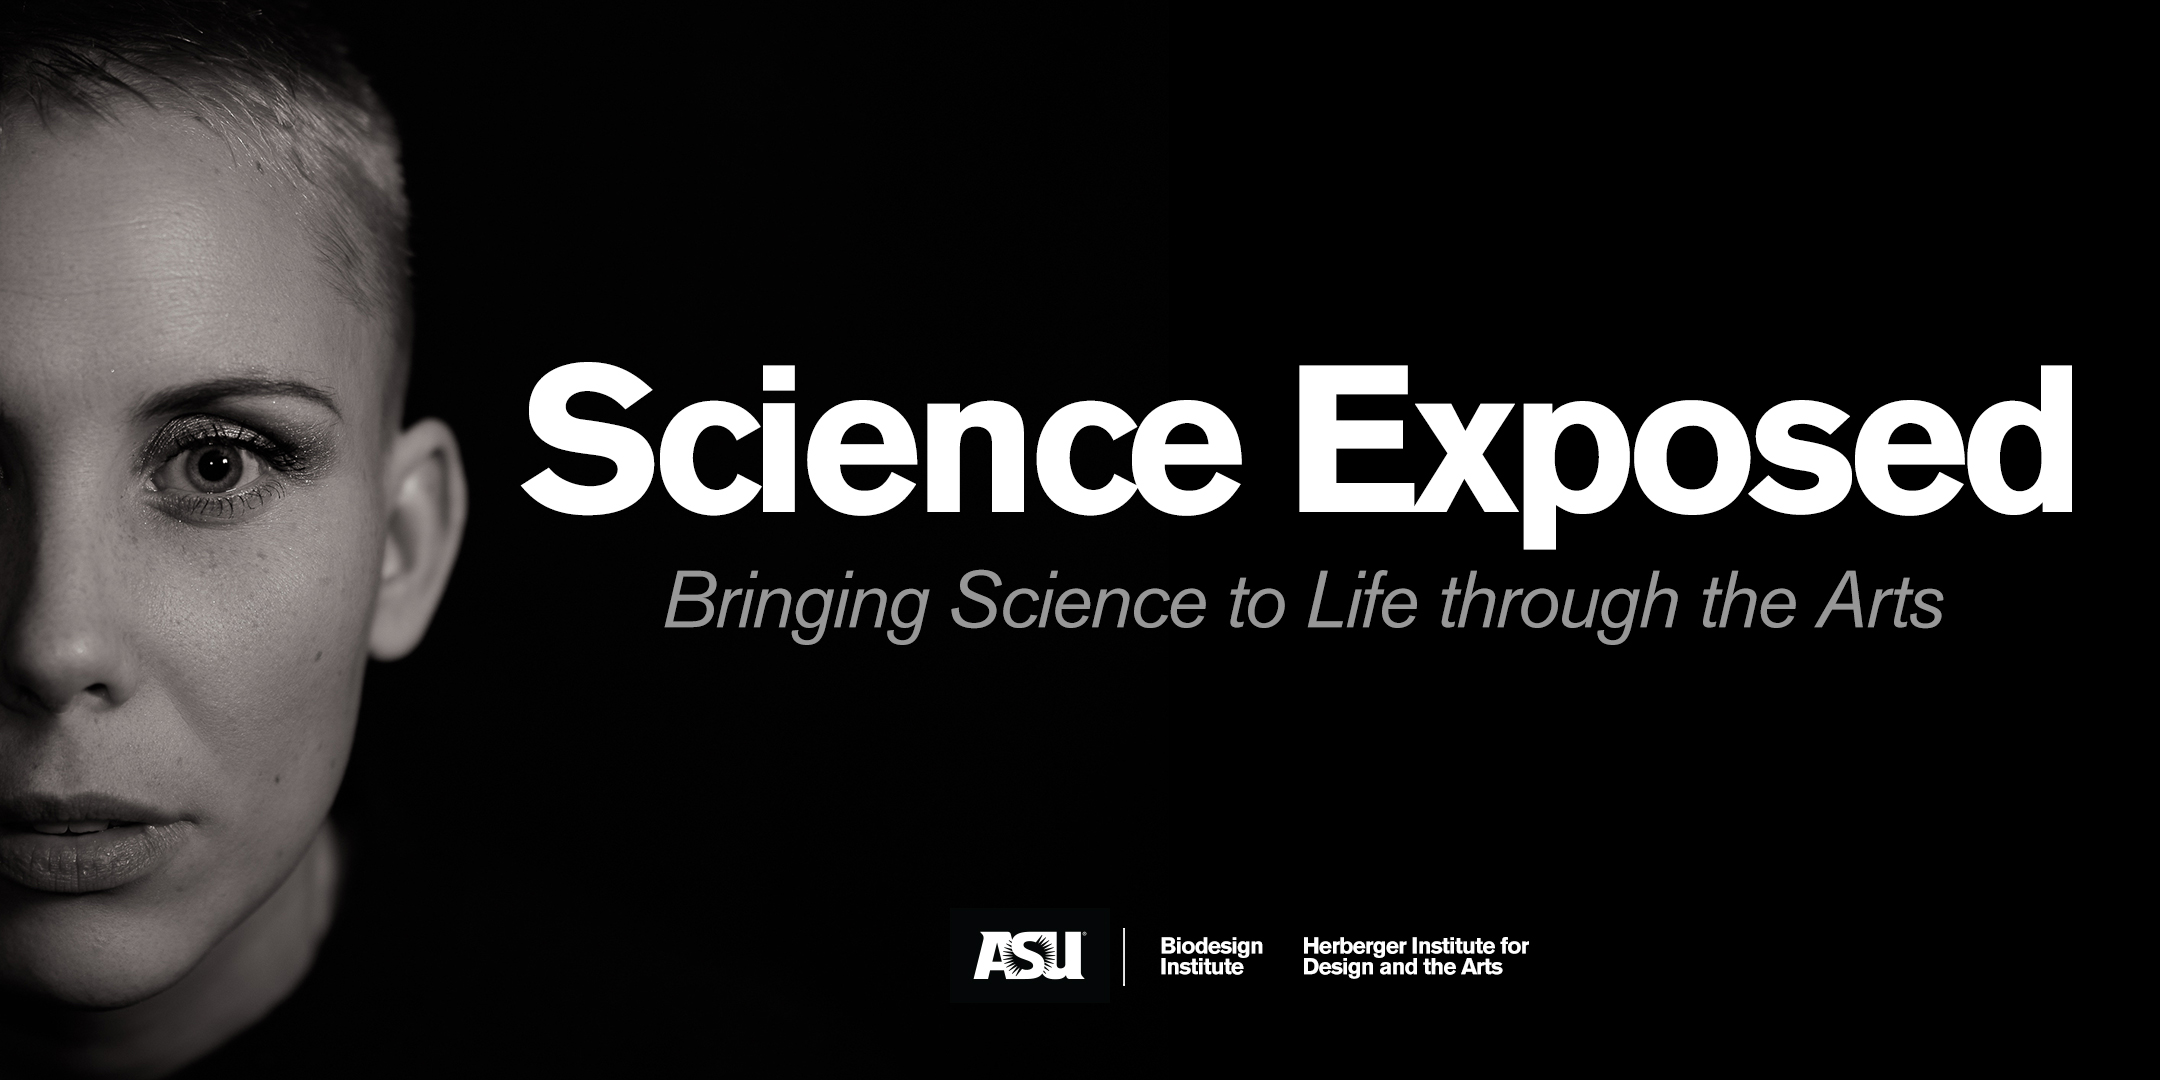 Science Exposed: Bringing Science to Life through the Arts